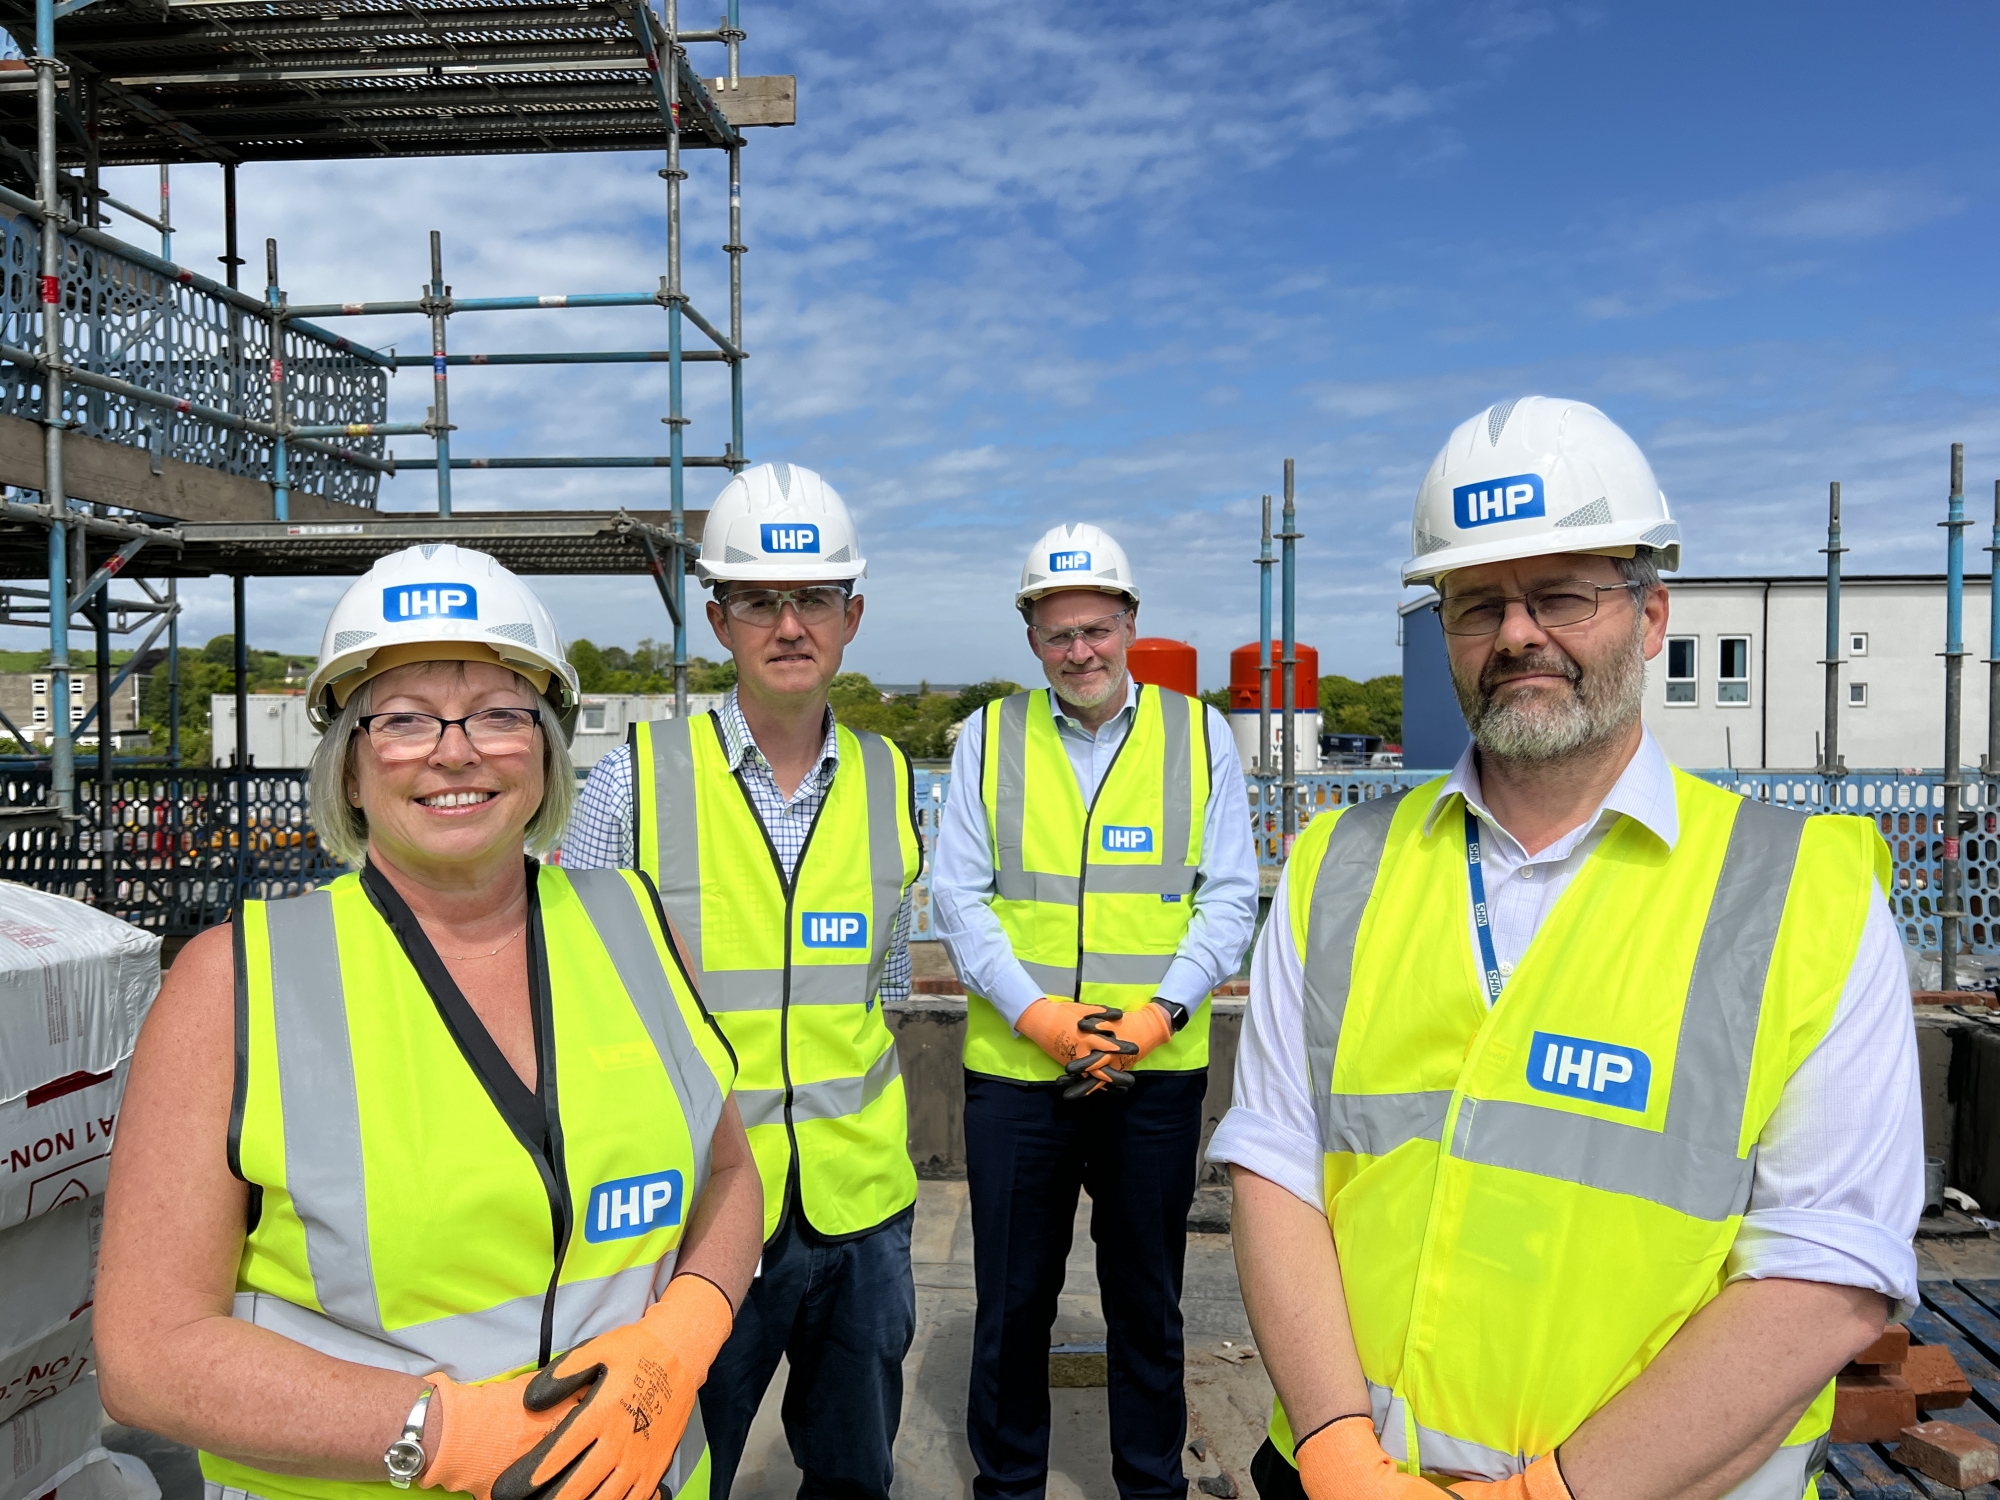 Trust staff wearing IHP protective clothing while stood on the roof terrace of the new emergency department in Scarborough.